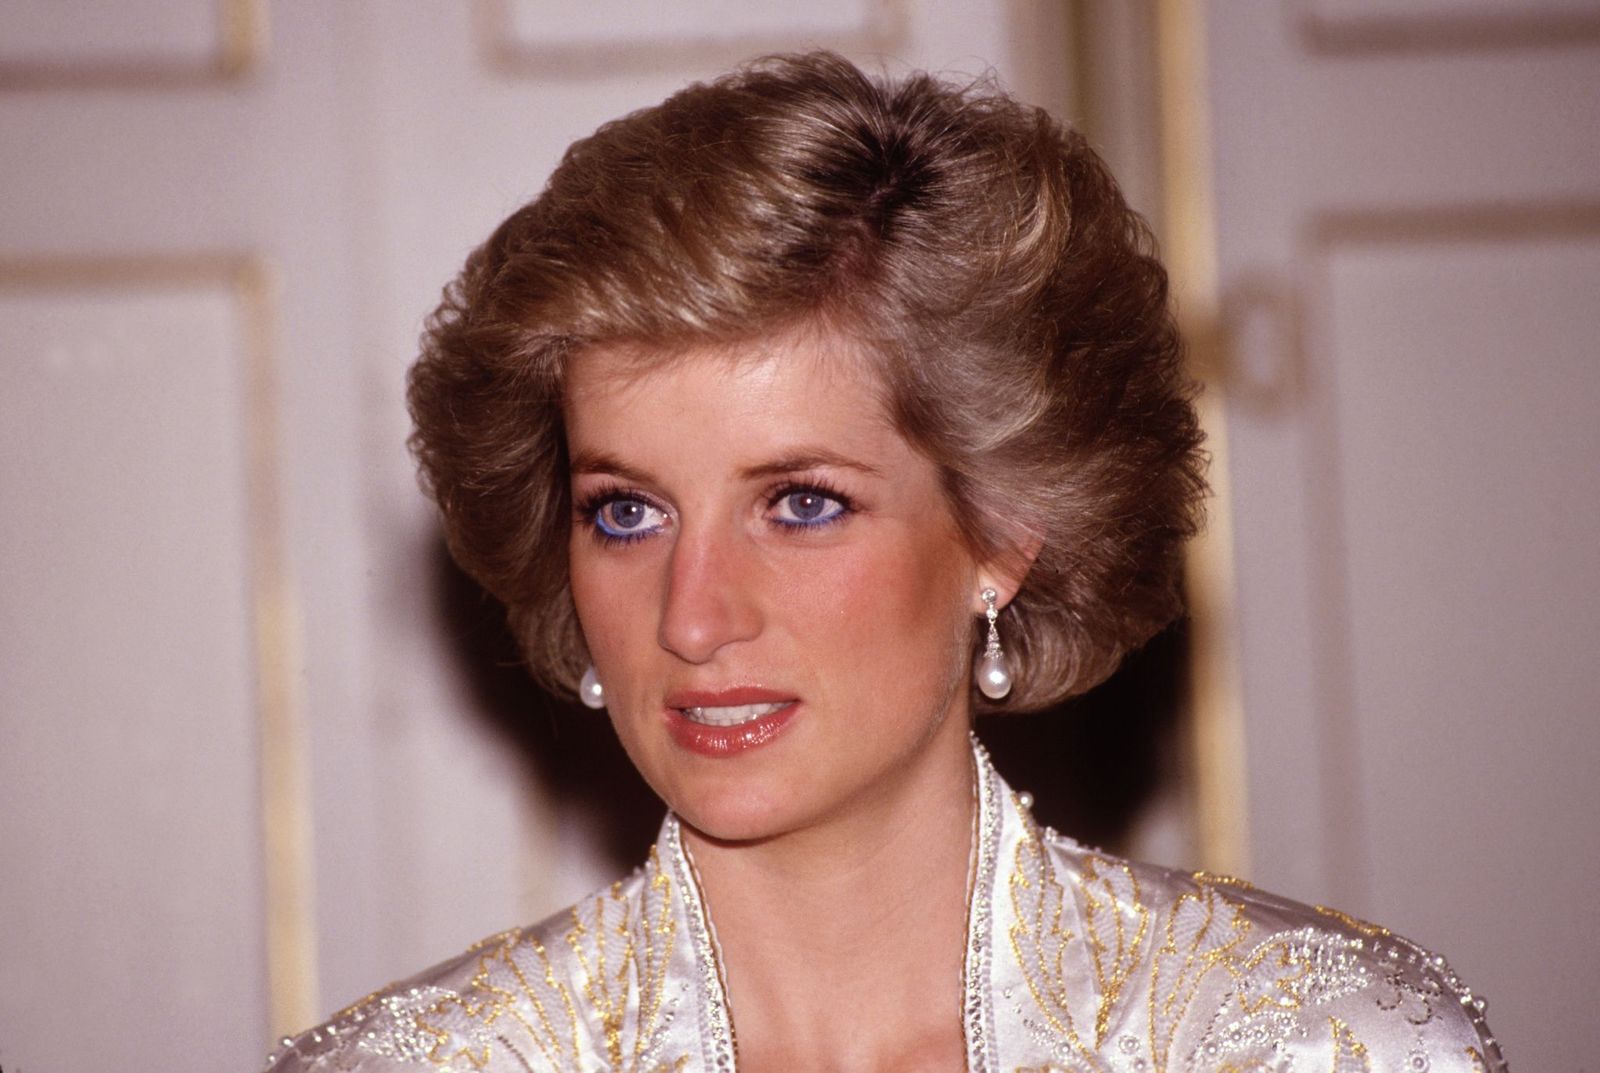 Princess Diana at a dinner given by President Mitterand in November, 1988 at the Elysee Palace in Paris, France | Photo: Getty Images